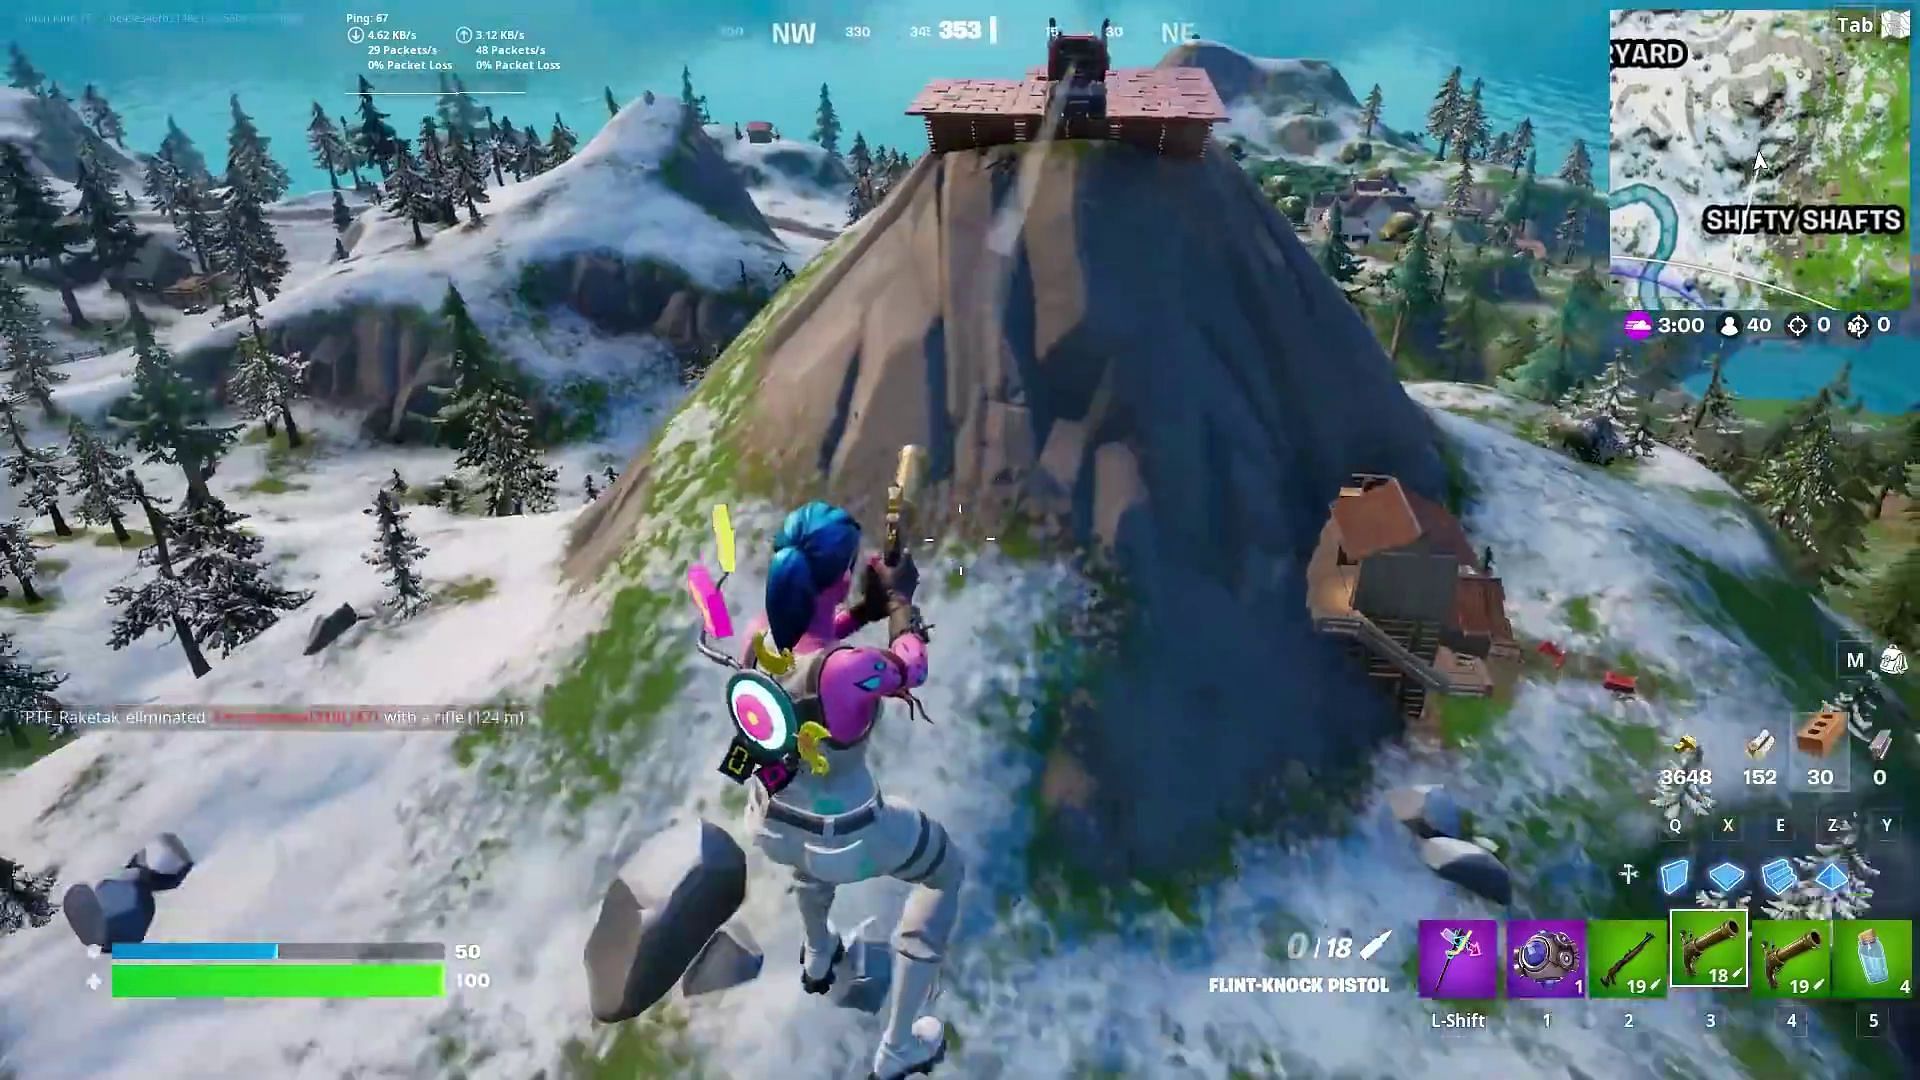 The glitch would result in the looper being launched to a greater distance (Image via YouTube/GKI)